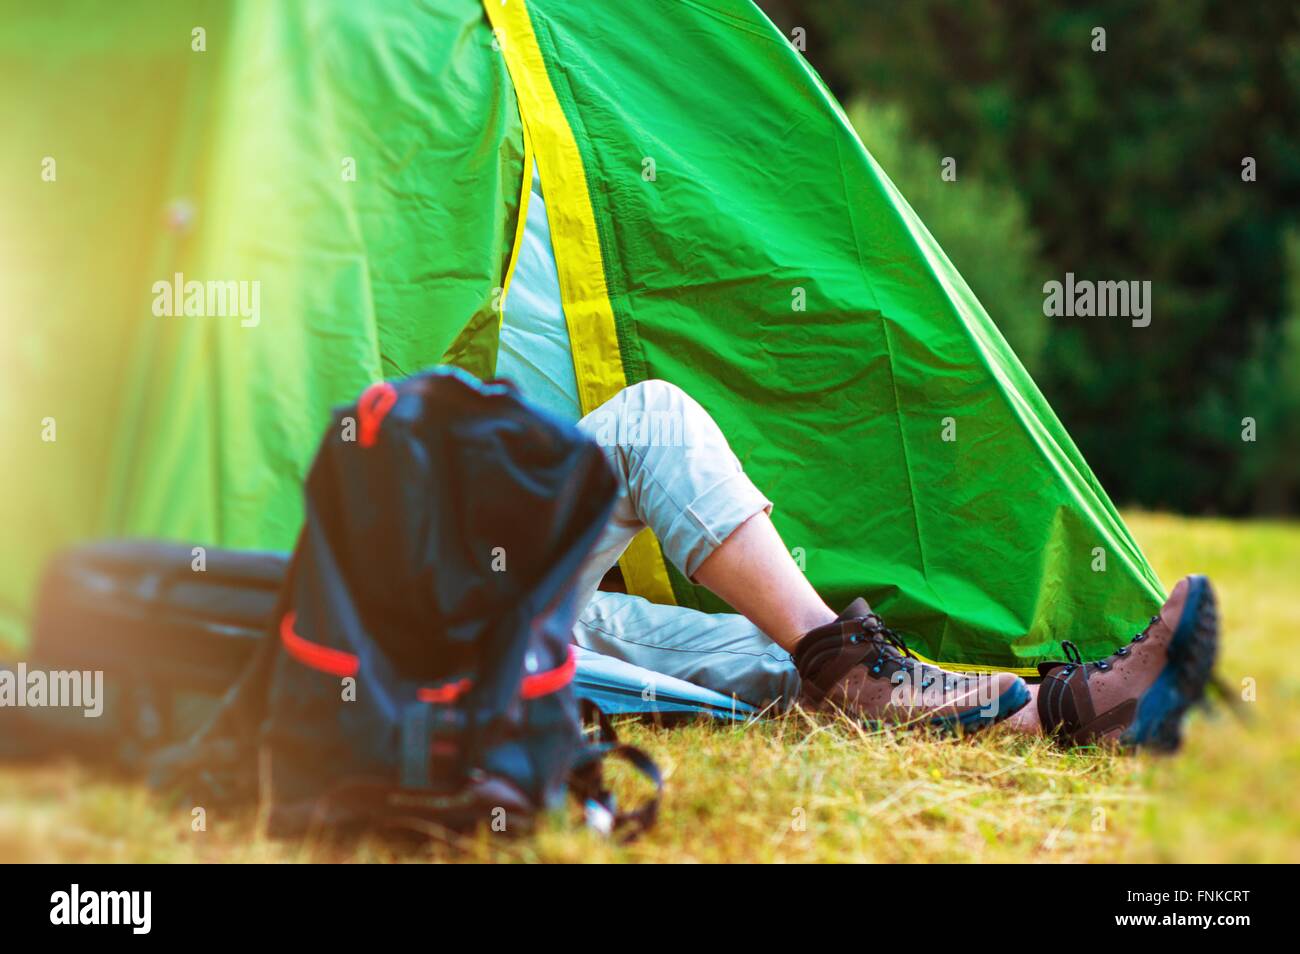 Wilderness Tent Camping. Hiker Resting in His Green Tent. Hiking and Camping Theme. Stock Photo